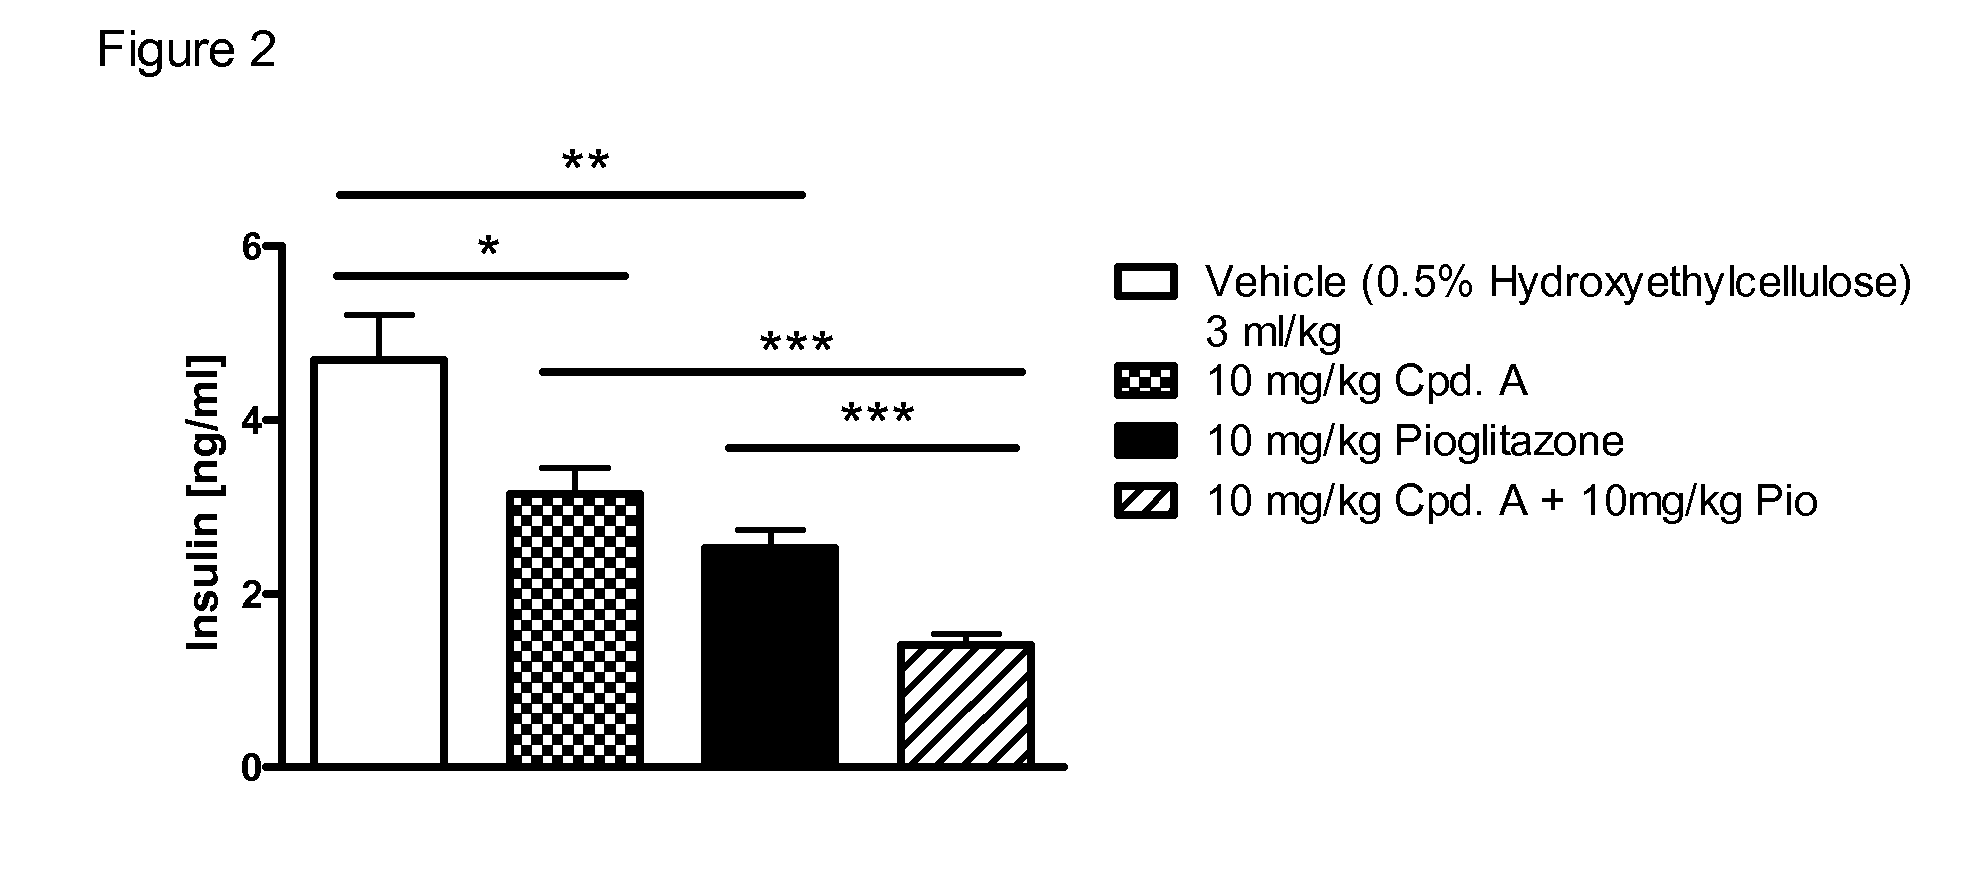 Pharmaceutical composition comprising an sglt2 inhibitor and a ppar- gamma agonist and uses thereof